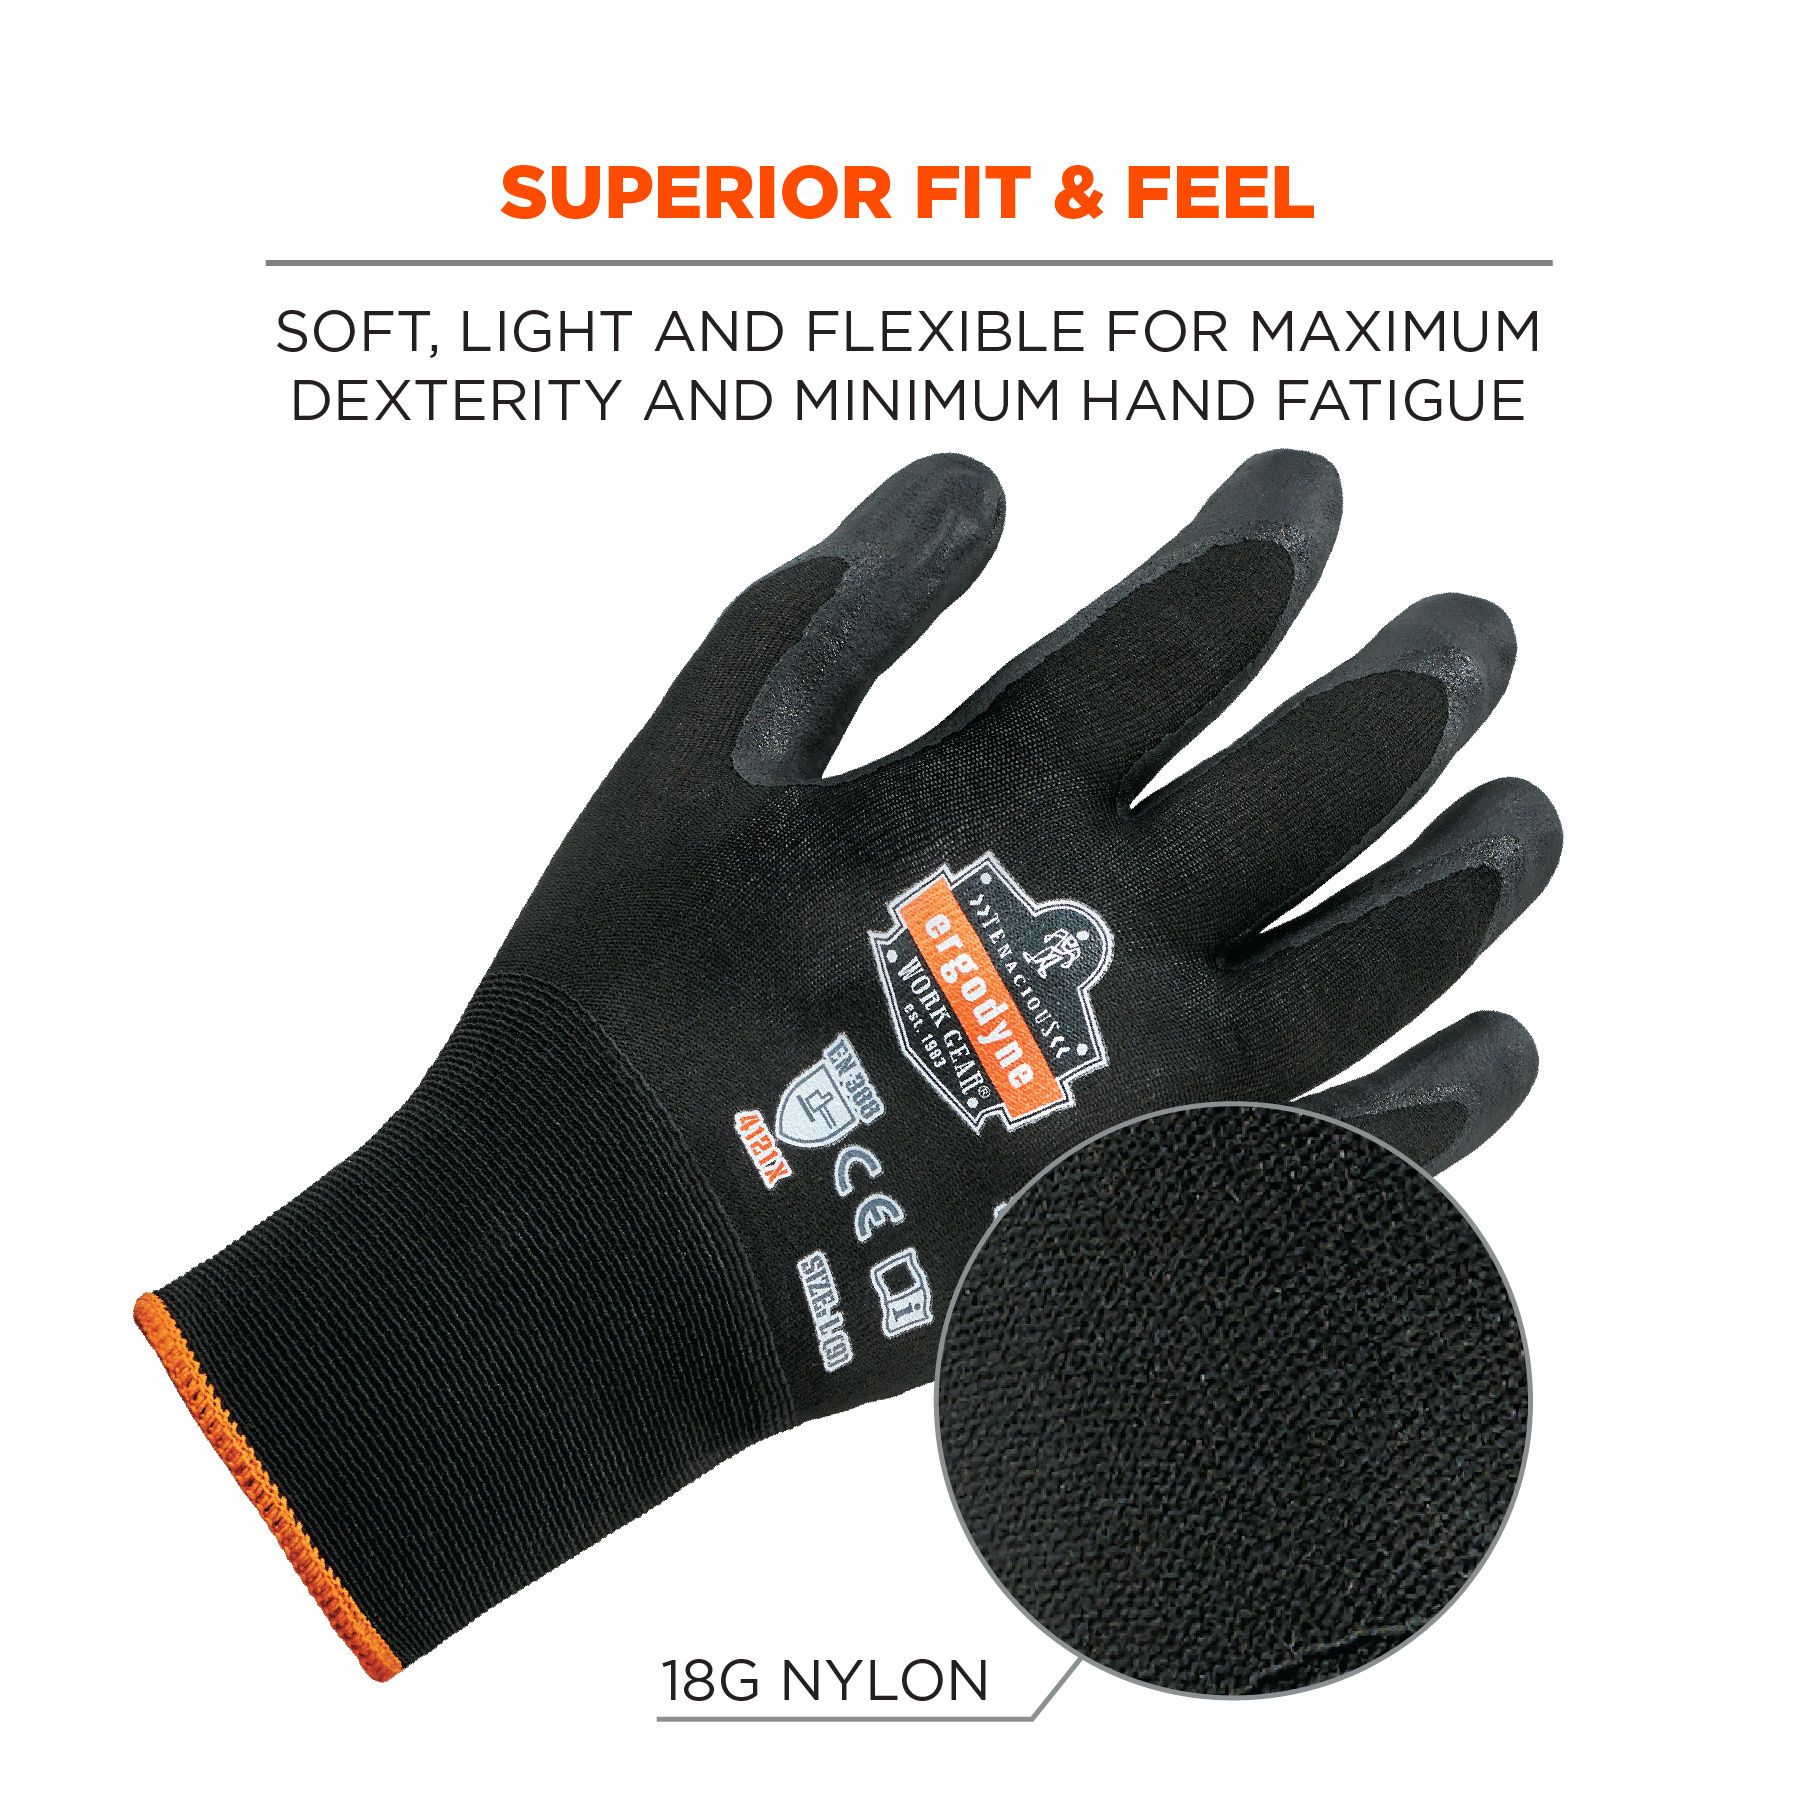 https://www.ergodyne.com/sites/default/files/product-images/17951-7001-nitrile-coated-gloves-superior-fit-and-feel_0.jpg